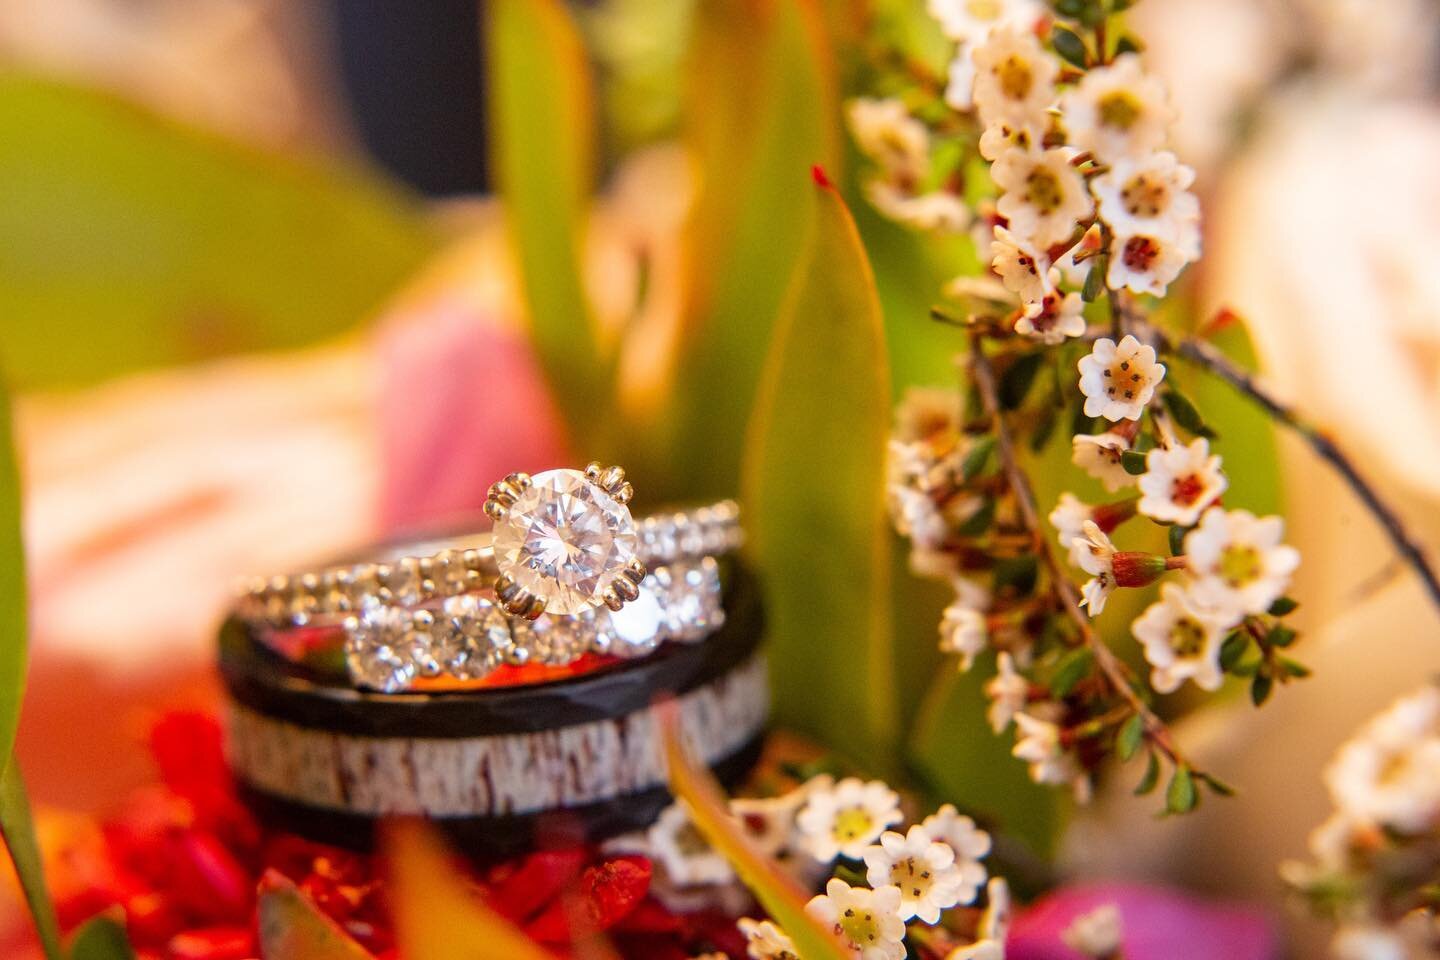 Summer Wedding Season in the Mountains is almost here&hellip;Don&rsquo;t forget the rings to the ceremony.
~PRO TIP ~On your wedding Day&hellip;. keep your rings with you instead of giving them to a guest to transport to the wedding venue&hellip;. 
M